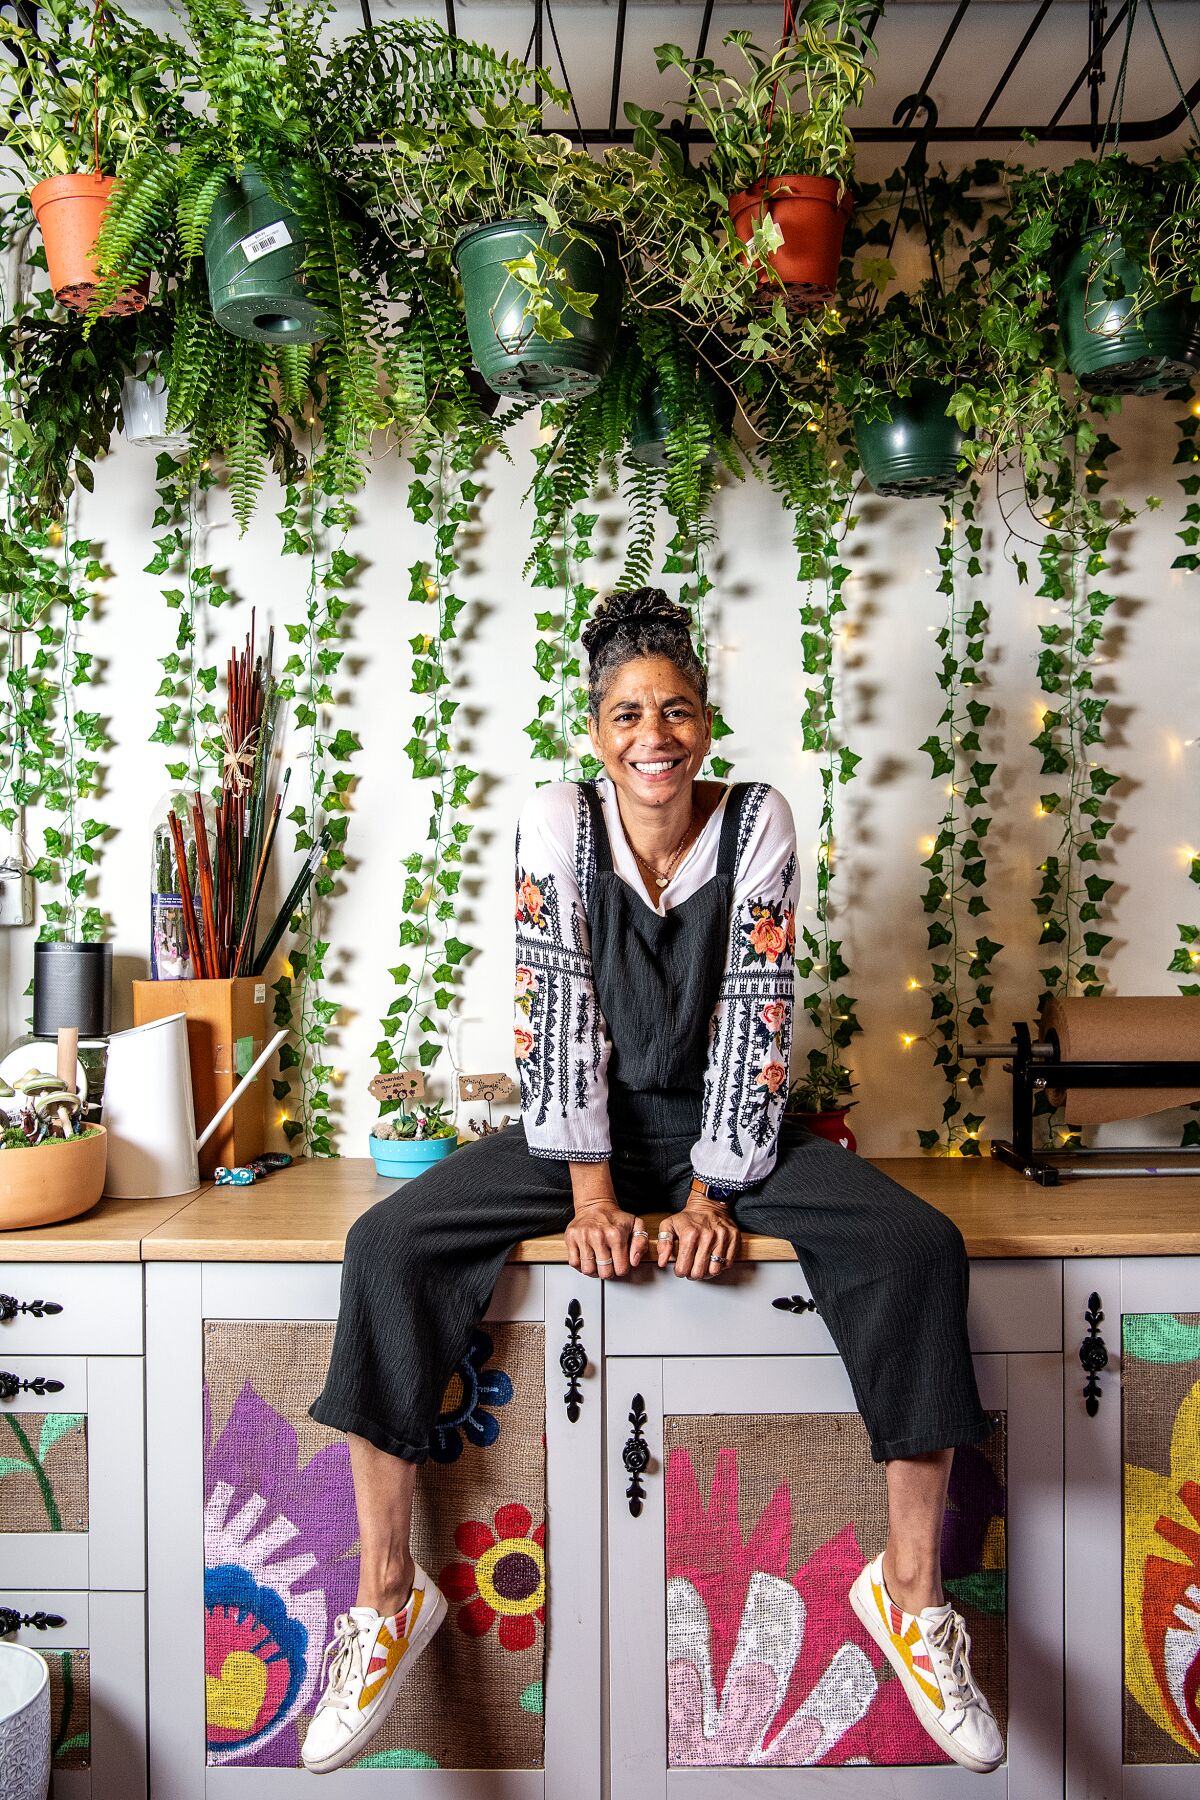 Photograph of Shawna Christian, sitting on a counter under hanging plants